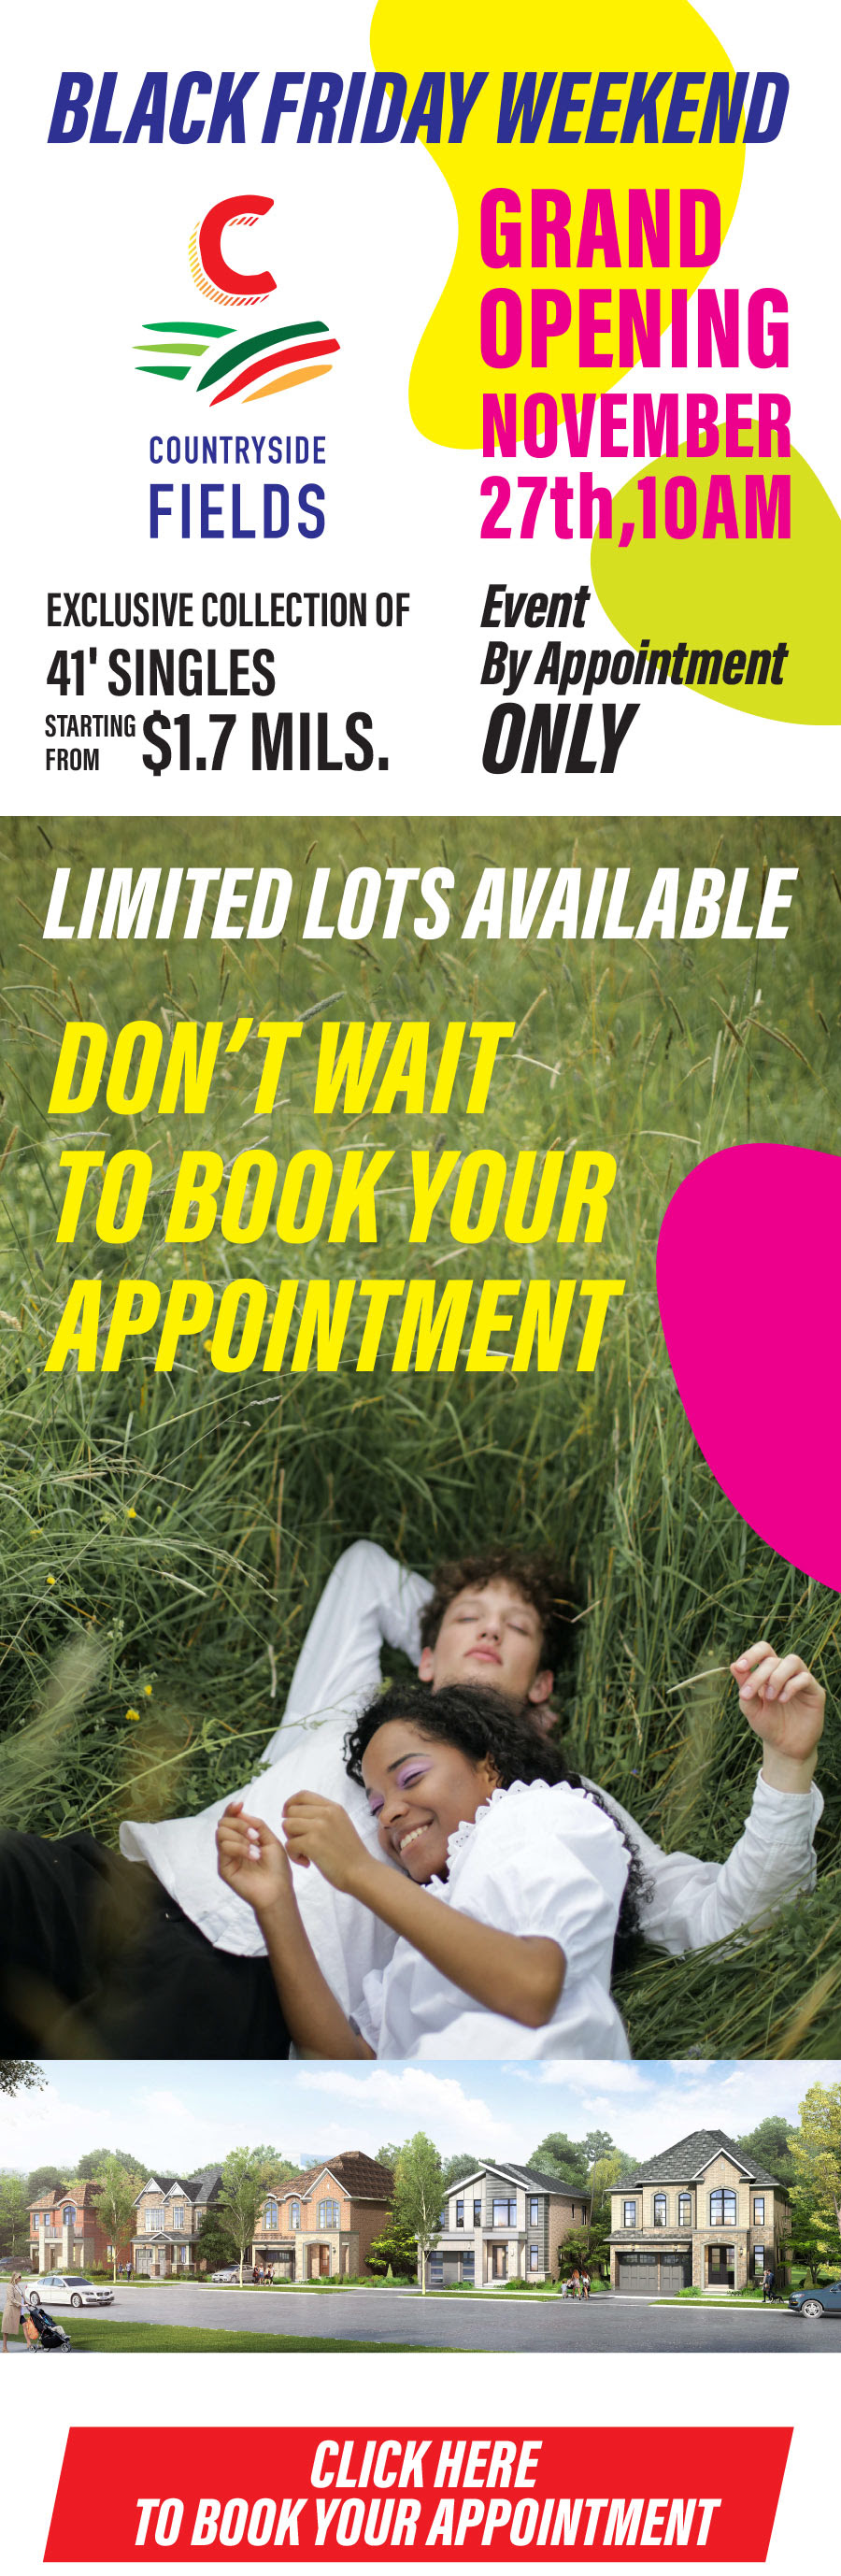 BOOK YOUR APPOINTMENT NOW!